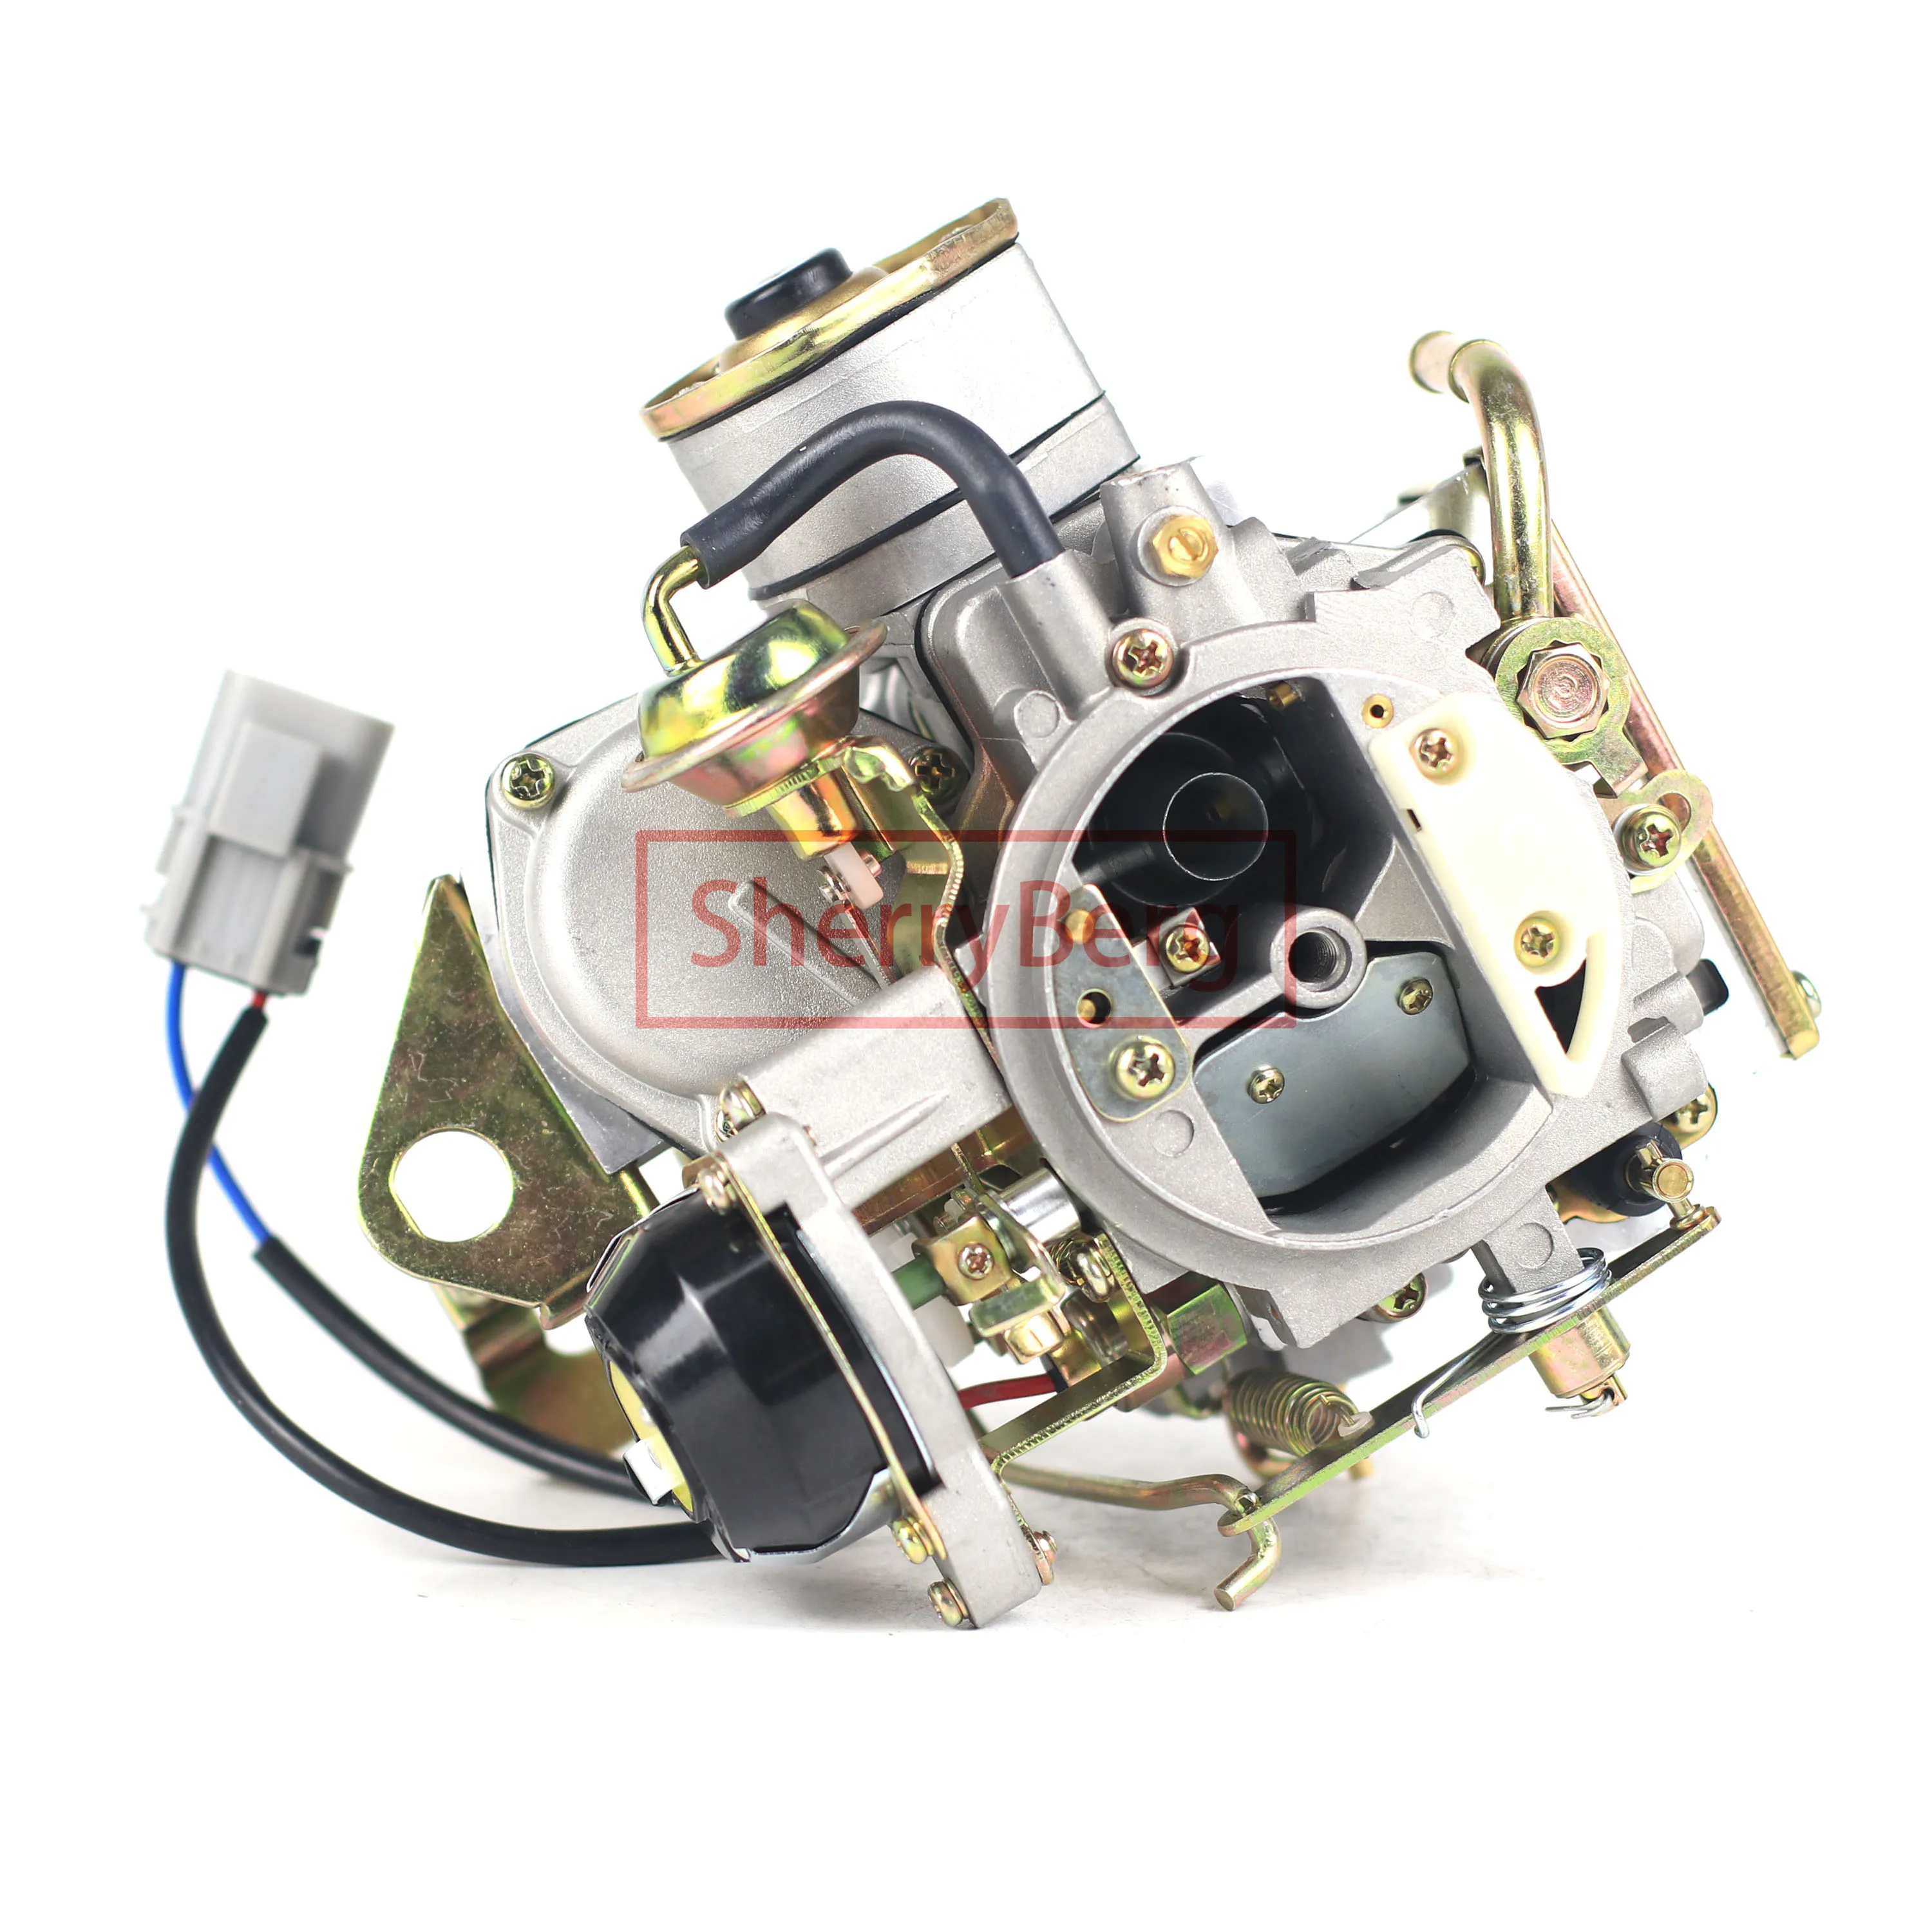 SherryBerg z 24 carburettor carby CARBURETOR carb for Nissan 720 pickup 2.4L Z24 Engine 1983-1986 16010-21G61 60 new for aisan